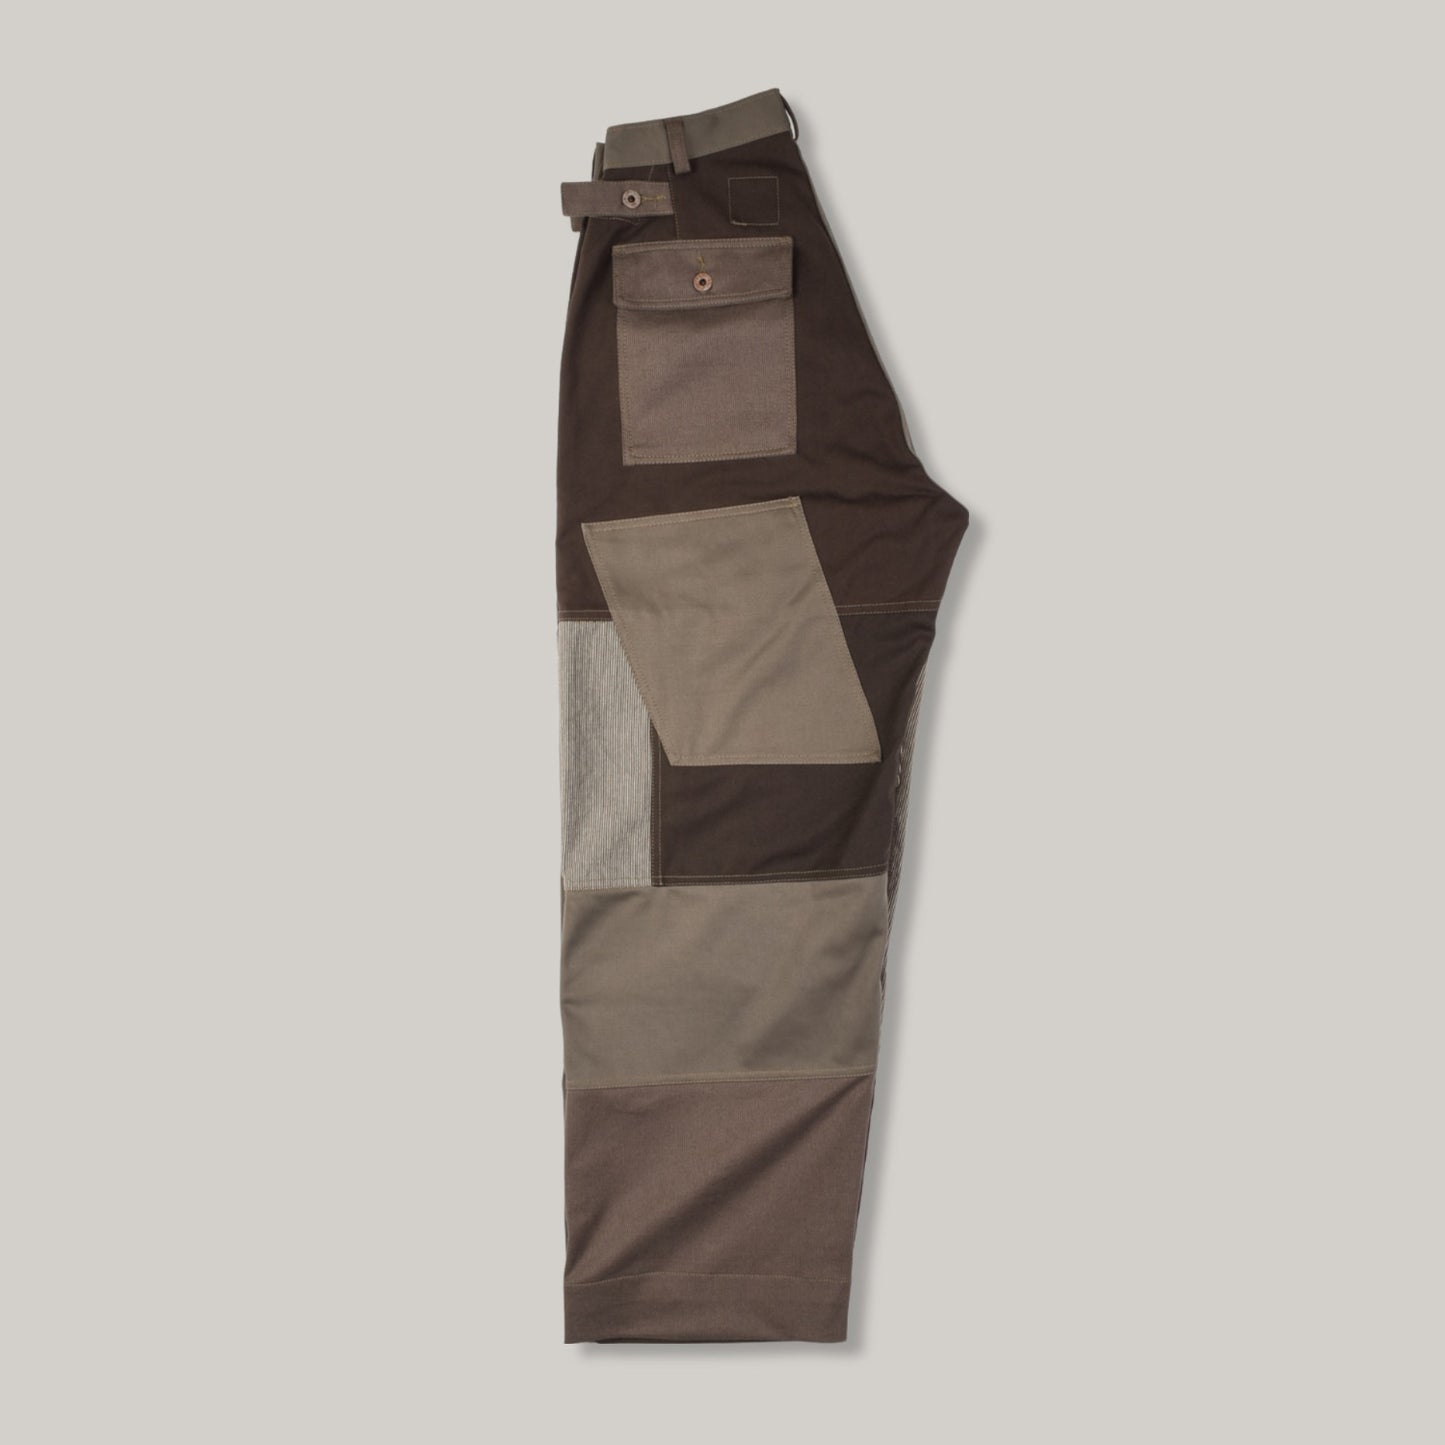 GOOD OL WHATS-HER-FACE BY W'MENSWEAR UNISEX FREEDOM FLIGHT TROUSER - ARMY GREEN